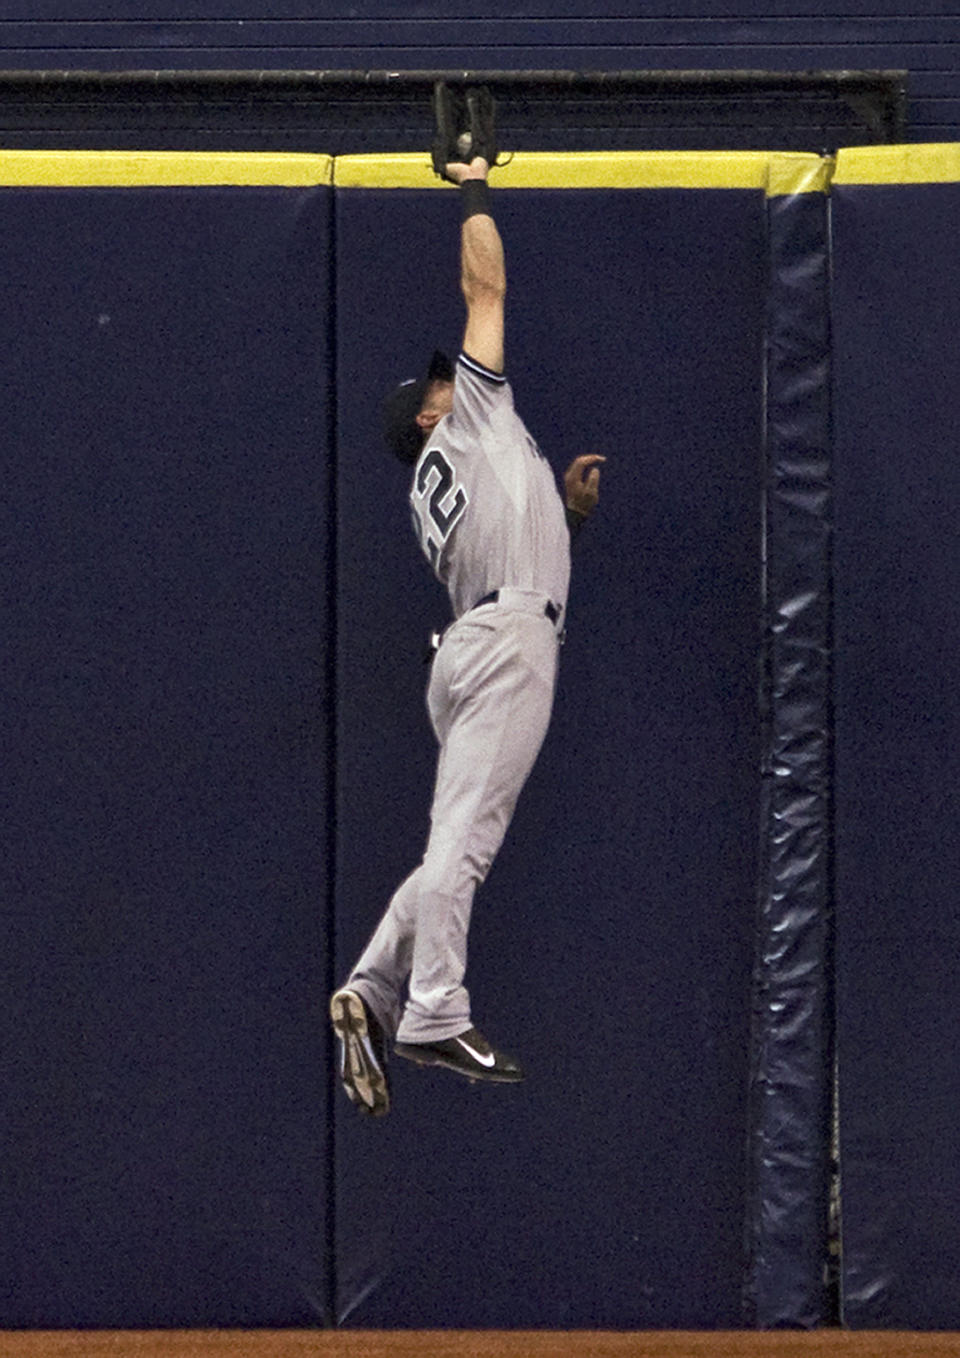 New York Yankees center fielder Jacoby Ellsbury robs Tampa Bay Rays' Ben Zobrist of an extra-base hit during the fourth inning of a baseball game Friday, April 18, 2014, in St. Petersburg, Fla. (AP Photo/Steve Nesius)